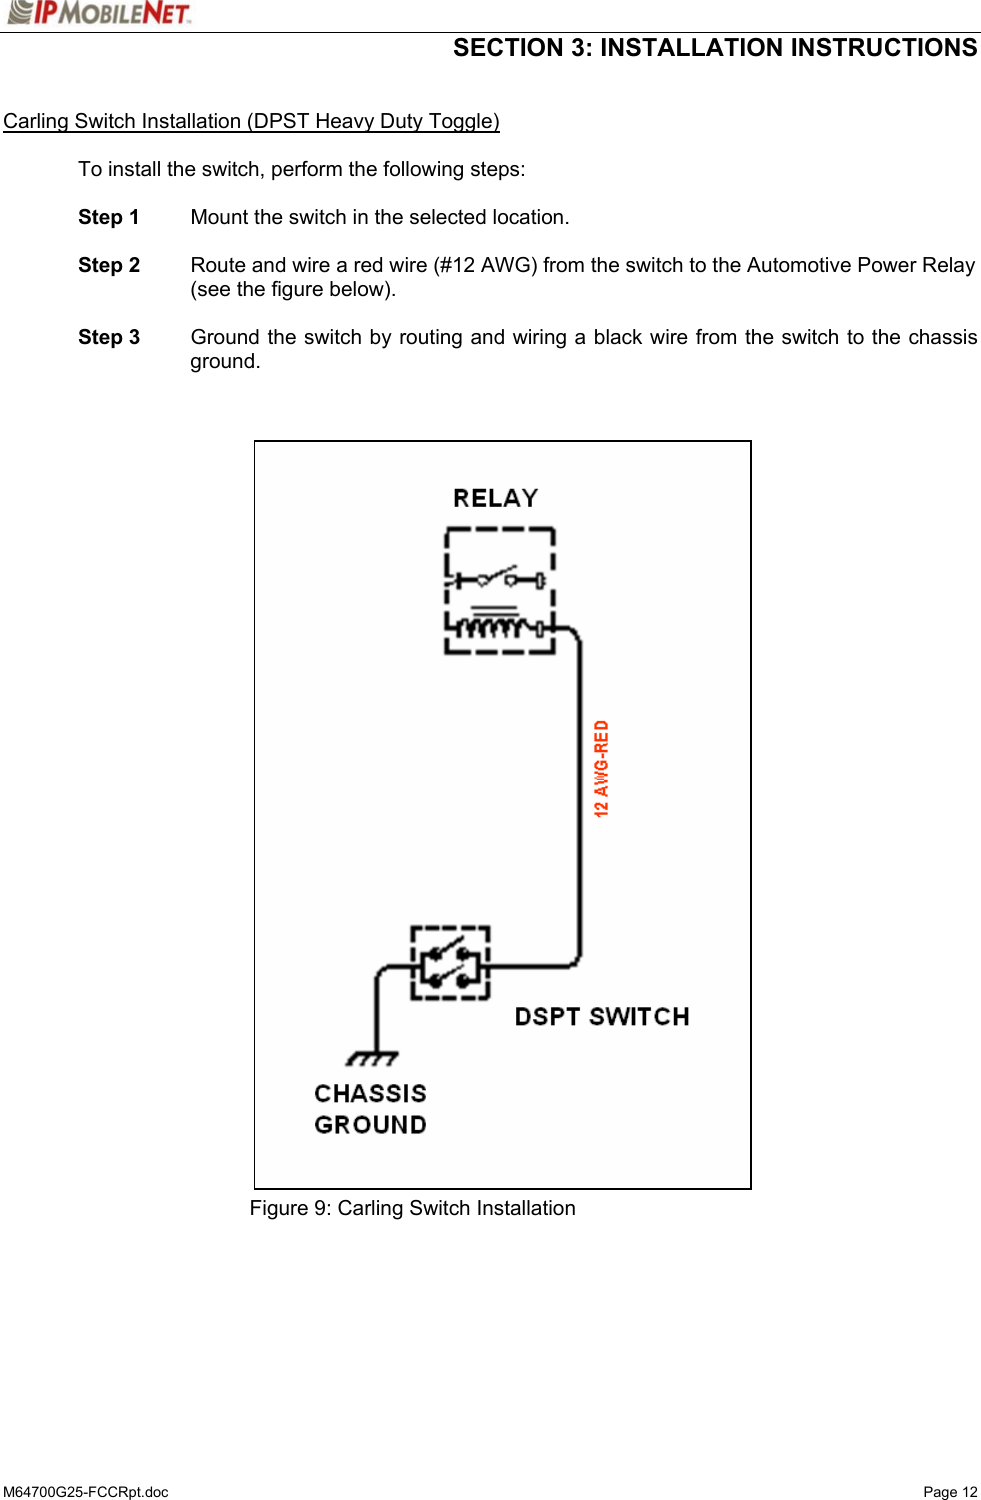  SECTION 3: INSTALLATION INSTRUCTIONS  M64700G25-FCCRpt.doc   Page 12  Carling Switch Installation (DPST Heavy Duty Toggle)  To install the switch, perform the following steps:   Step 1  Mount the switch in the selected location.   Step 2  Route and wire a red wire (#12 AWG) from the switch to the Automotive Power Relay (see the figure below).   Step 3    Ground the switch by routing and wiring a black wire from the switch to the chassis ground.                                    Figure 9: Carling Switch Installation   